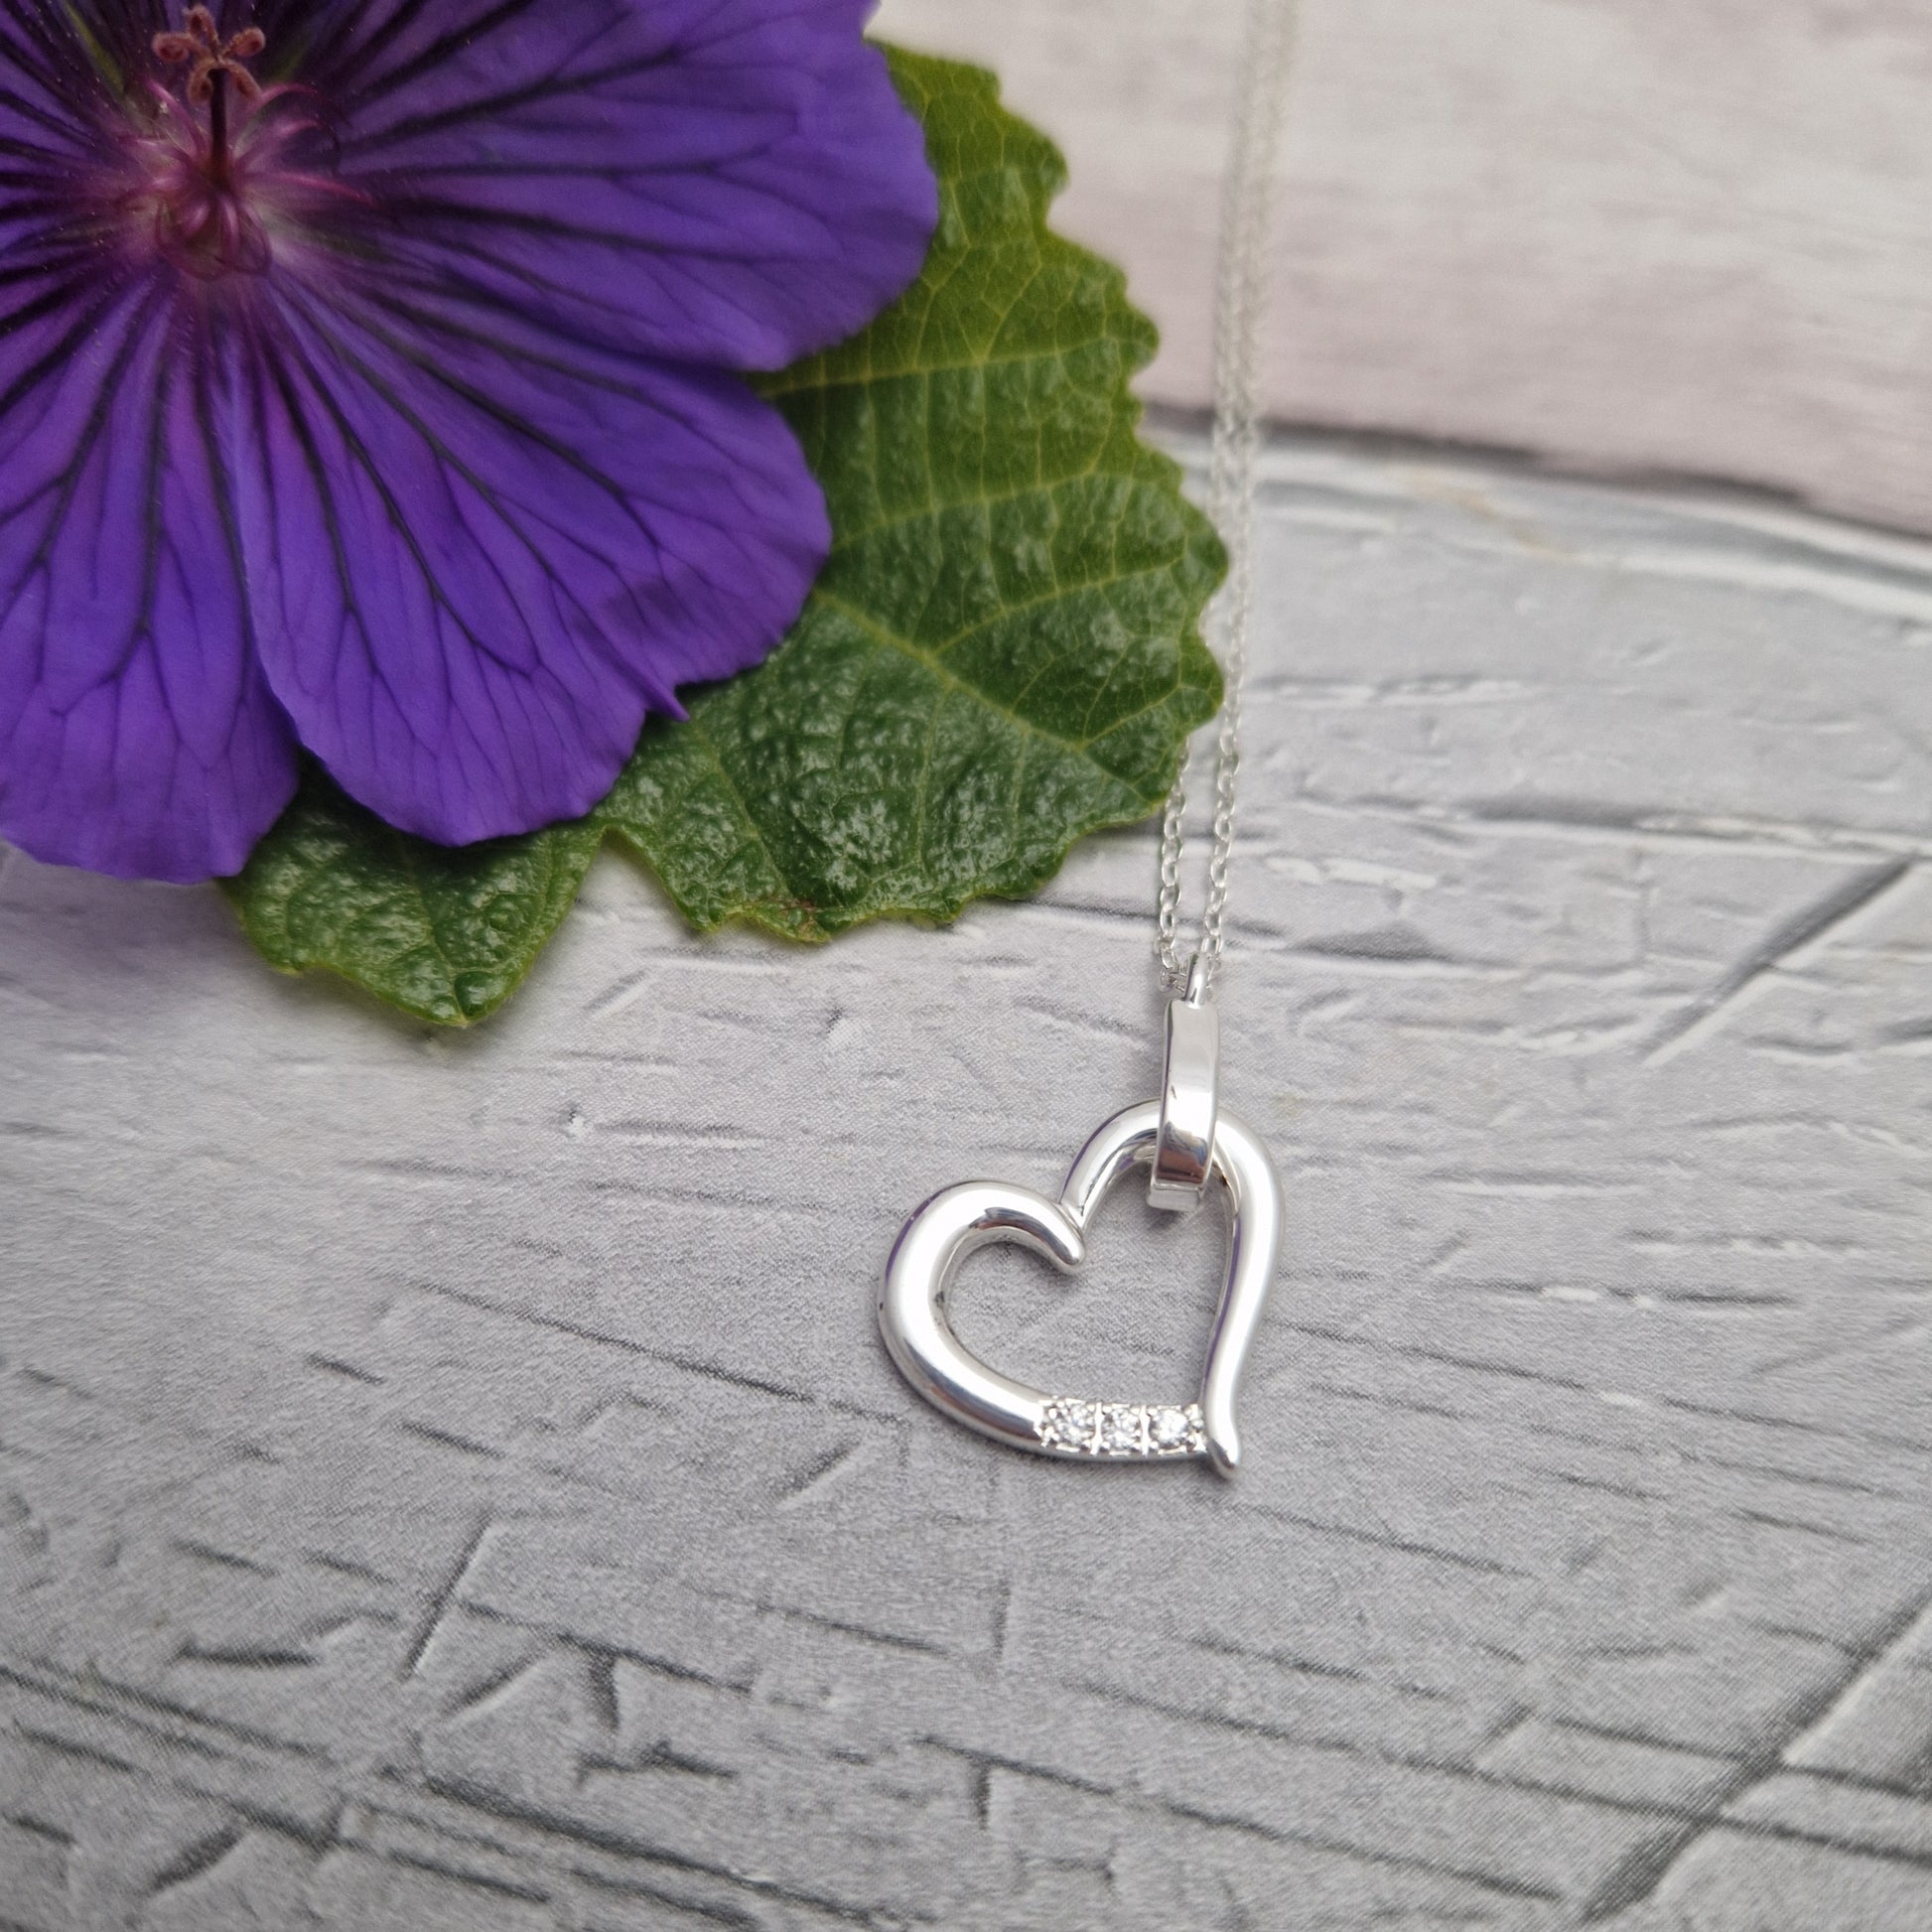 Silver Plated necklace with love heart pendant, set with diamante crystals.